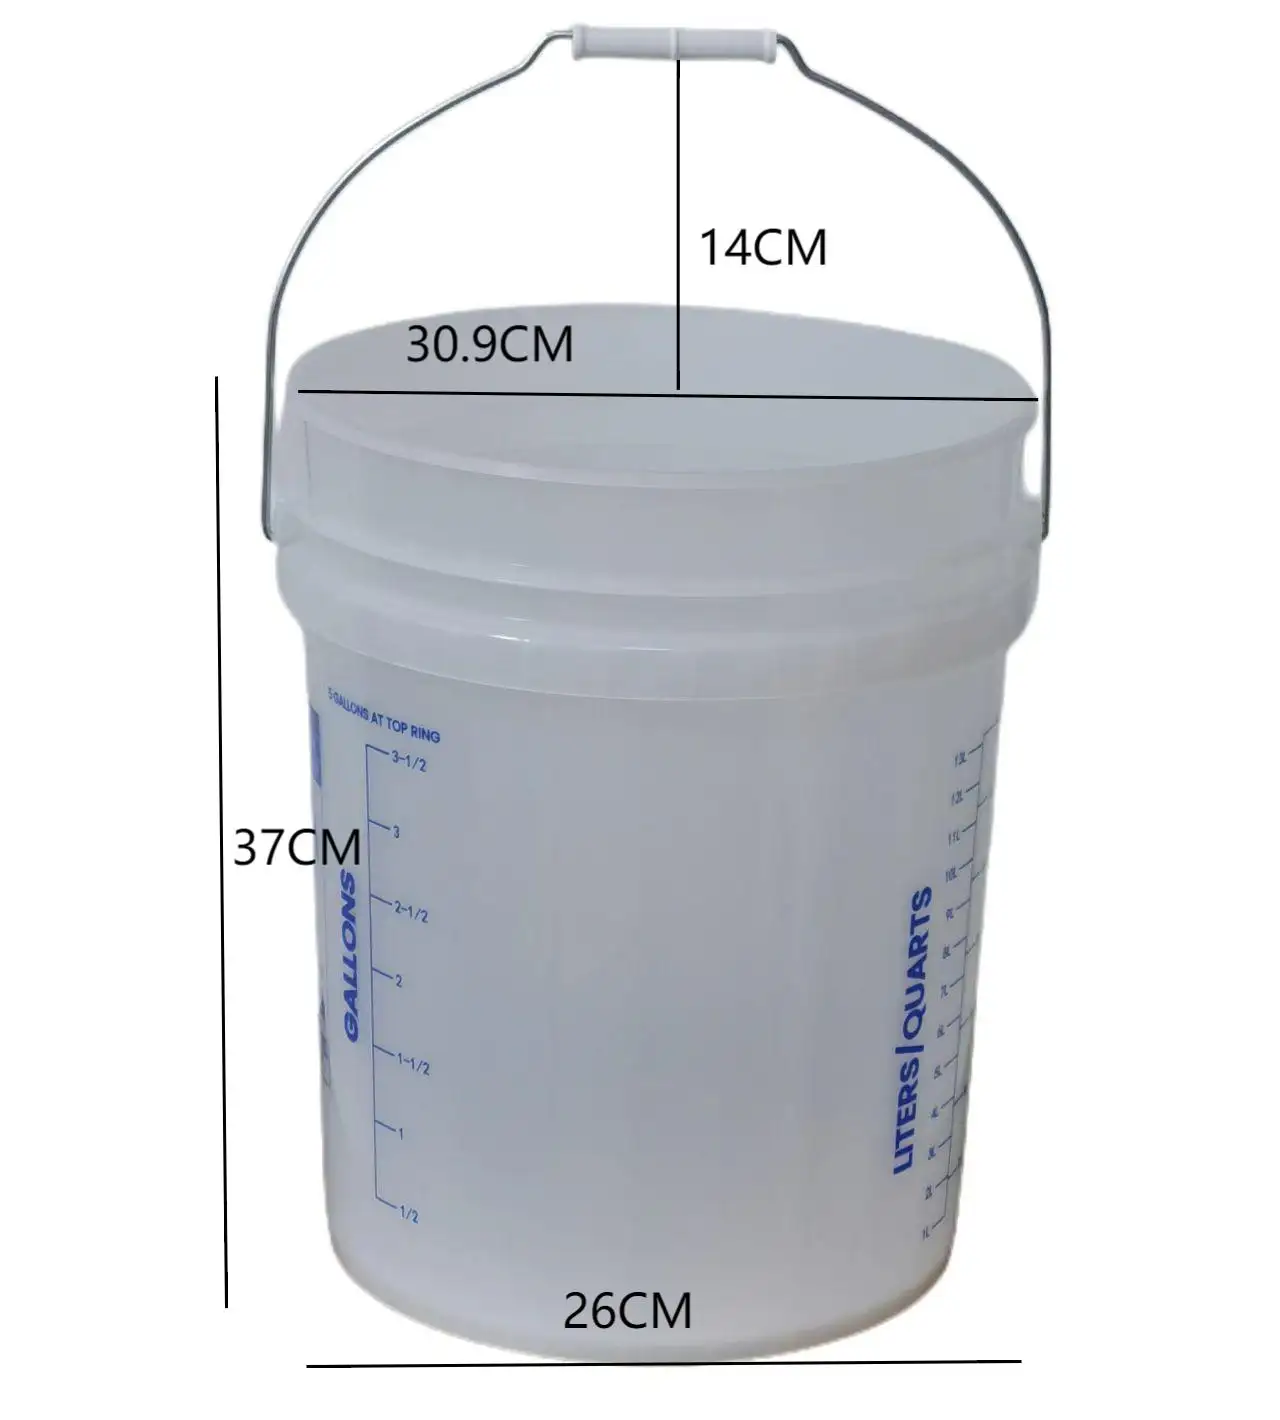 Translucent Marking Gallons and Liters 5 Gal 19L Bucket Wine Beer Barrel Made in Food Grade HDPE From SDPAC